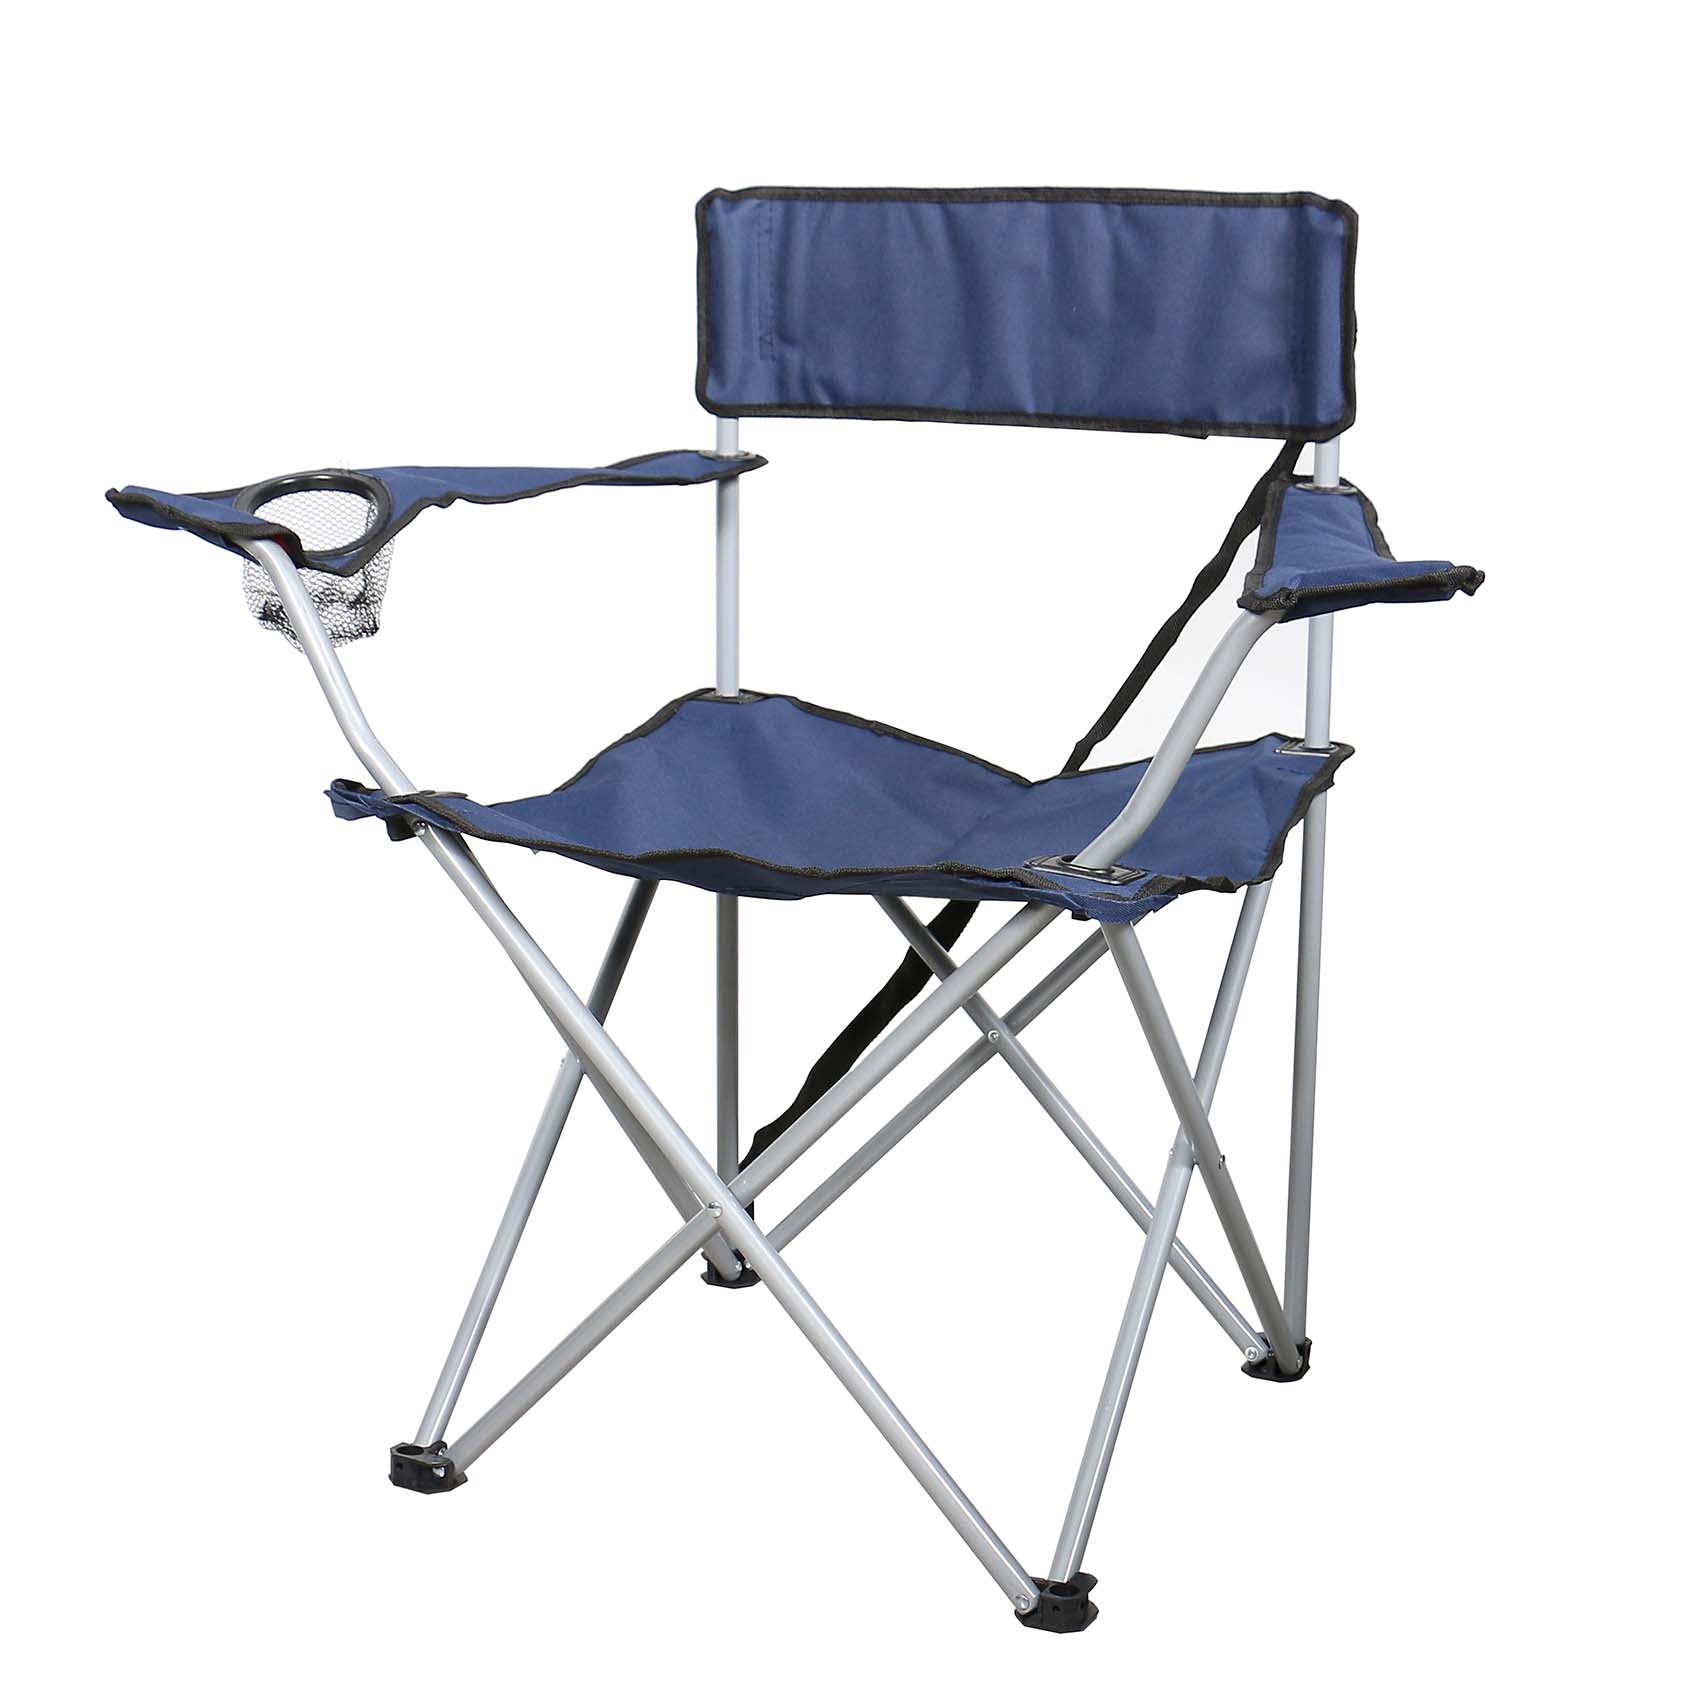 CAMPMATE FOLDING CHAIR CM1804 FISHING CAMPING OUTDOOR BEACH